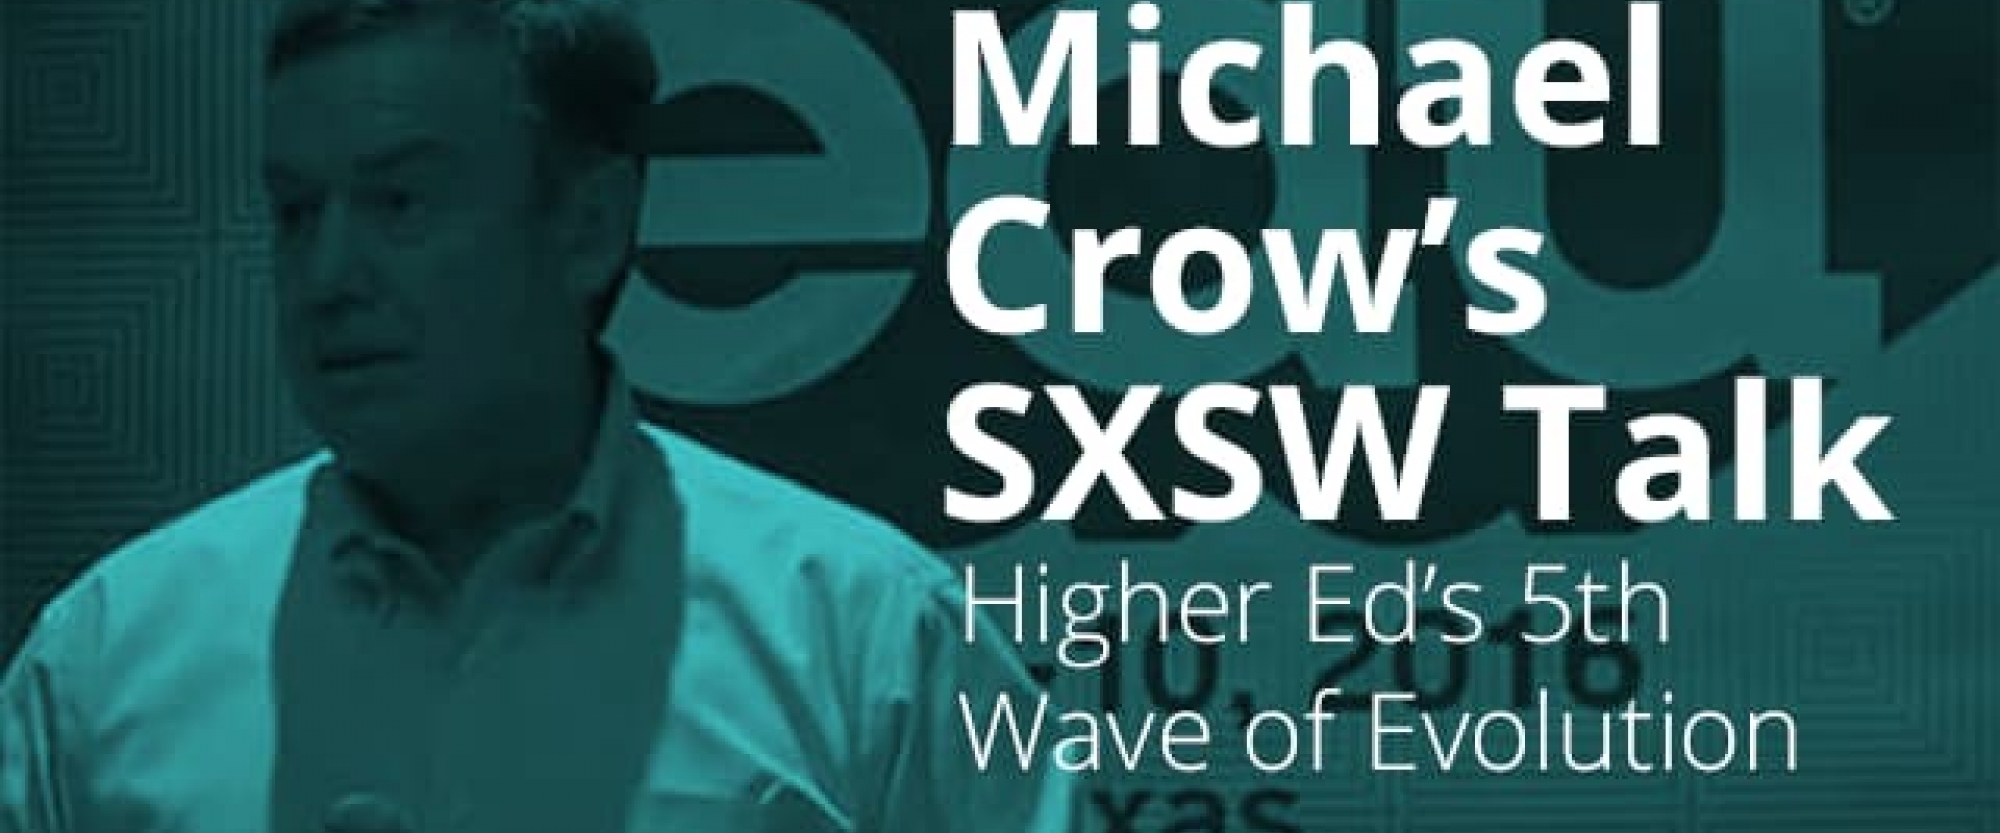 ASU President Michael Crow's SXSW Talk: What Will the Next Wave of Change in Higher Ed Look Like?